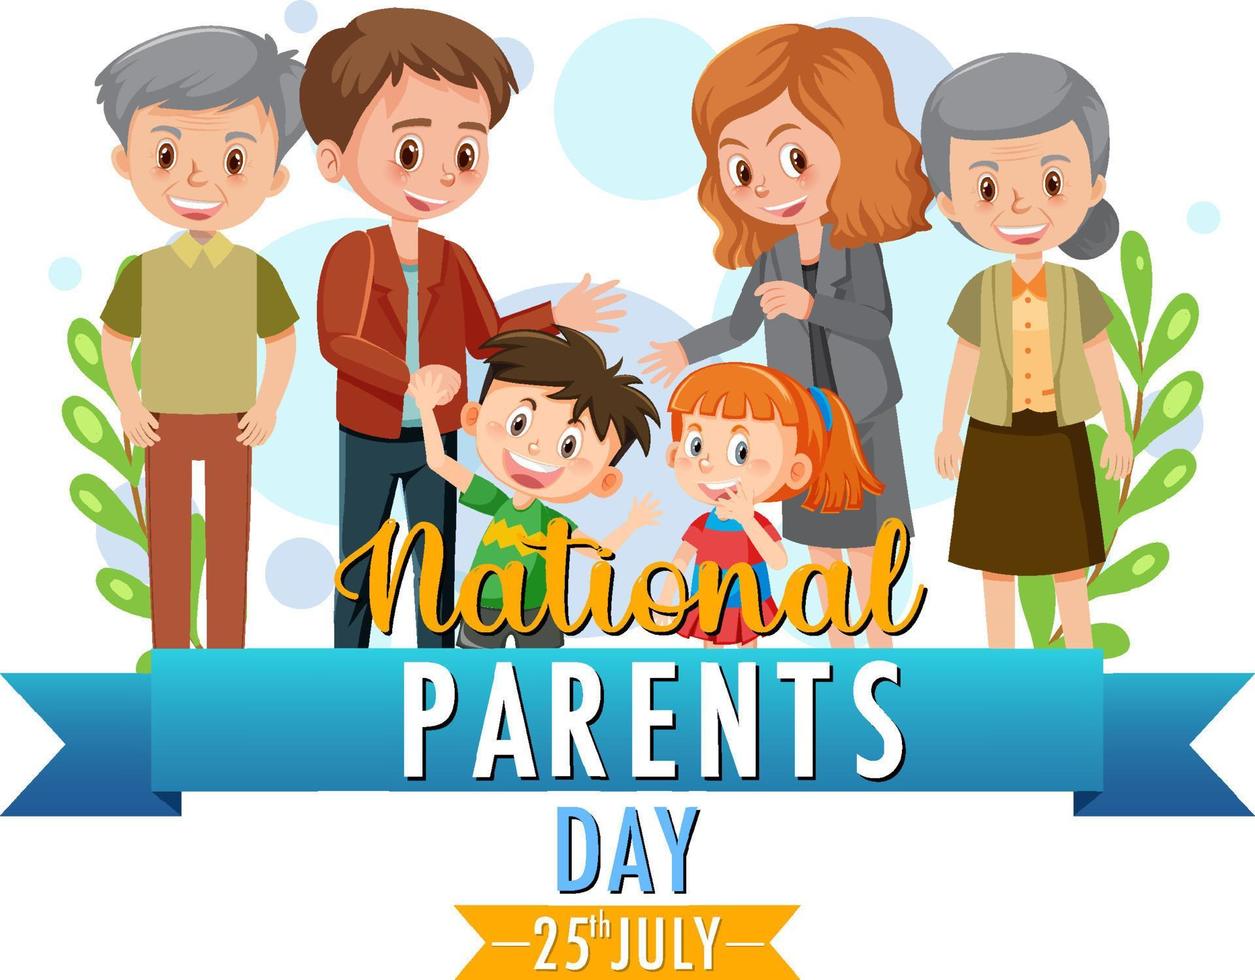 National Parents Day On 25th July Poster Template vector